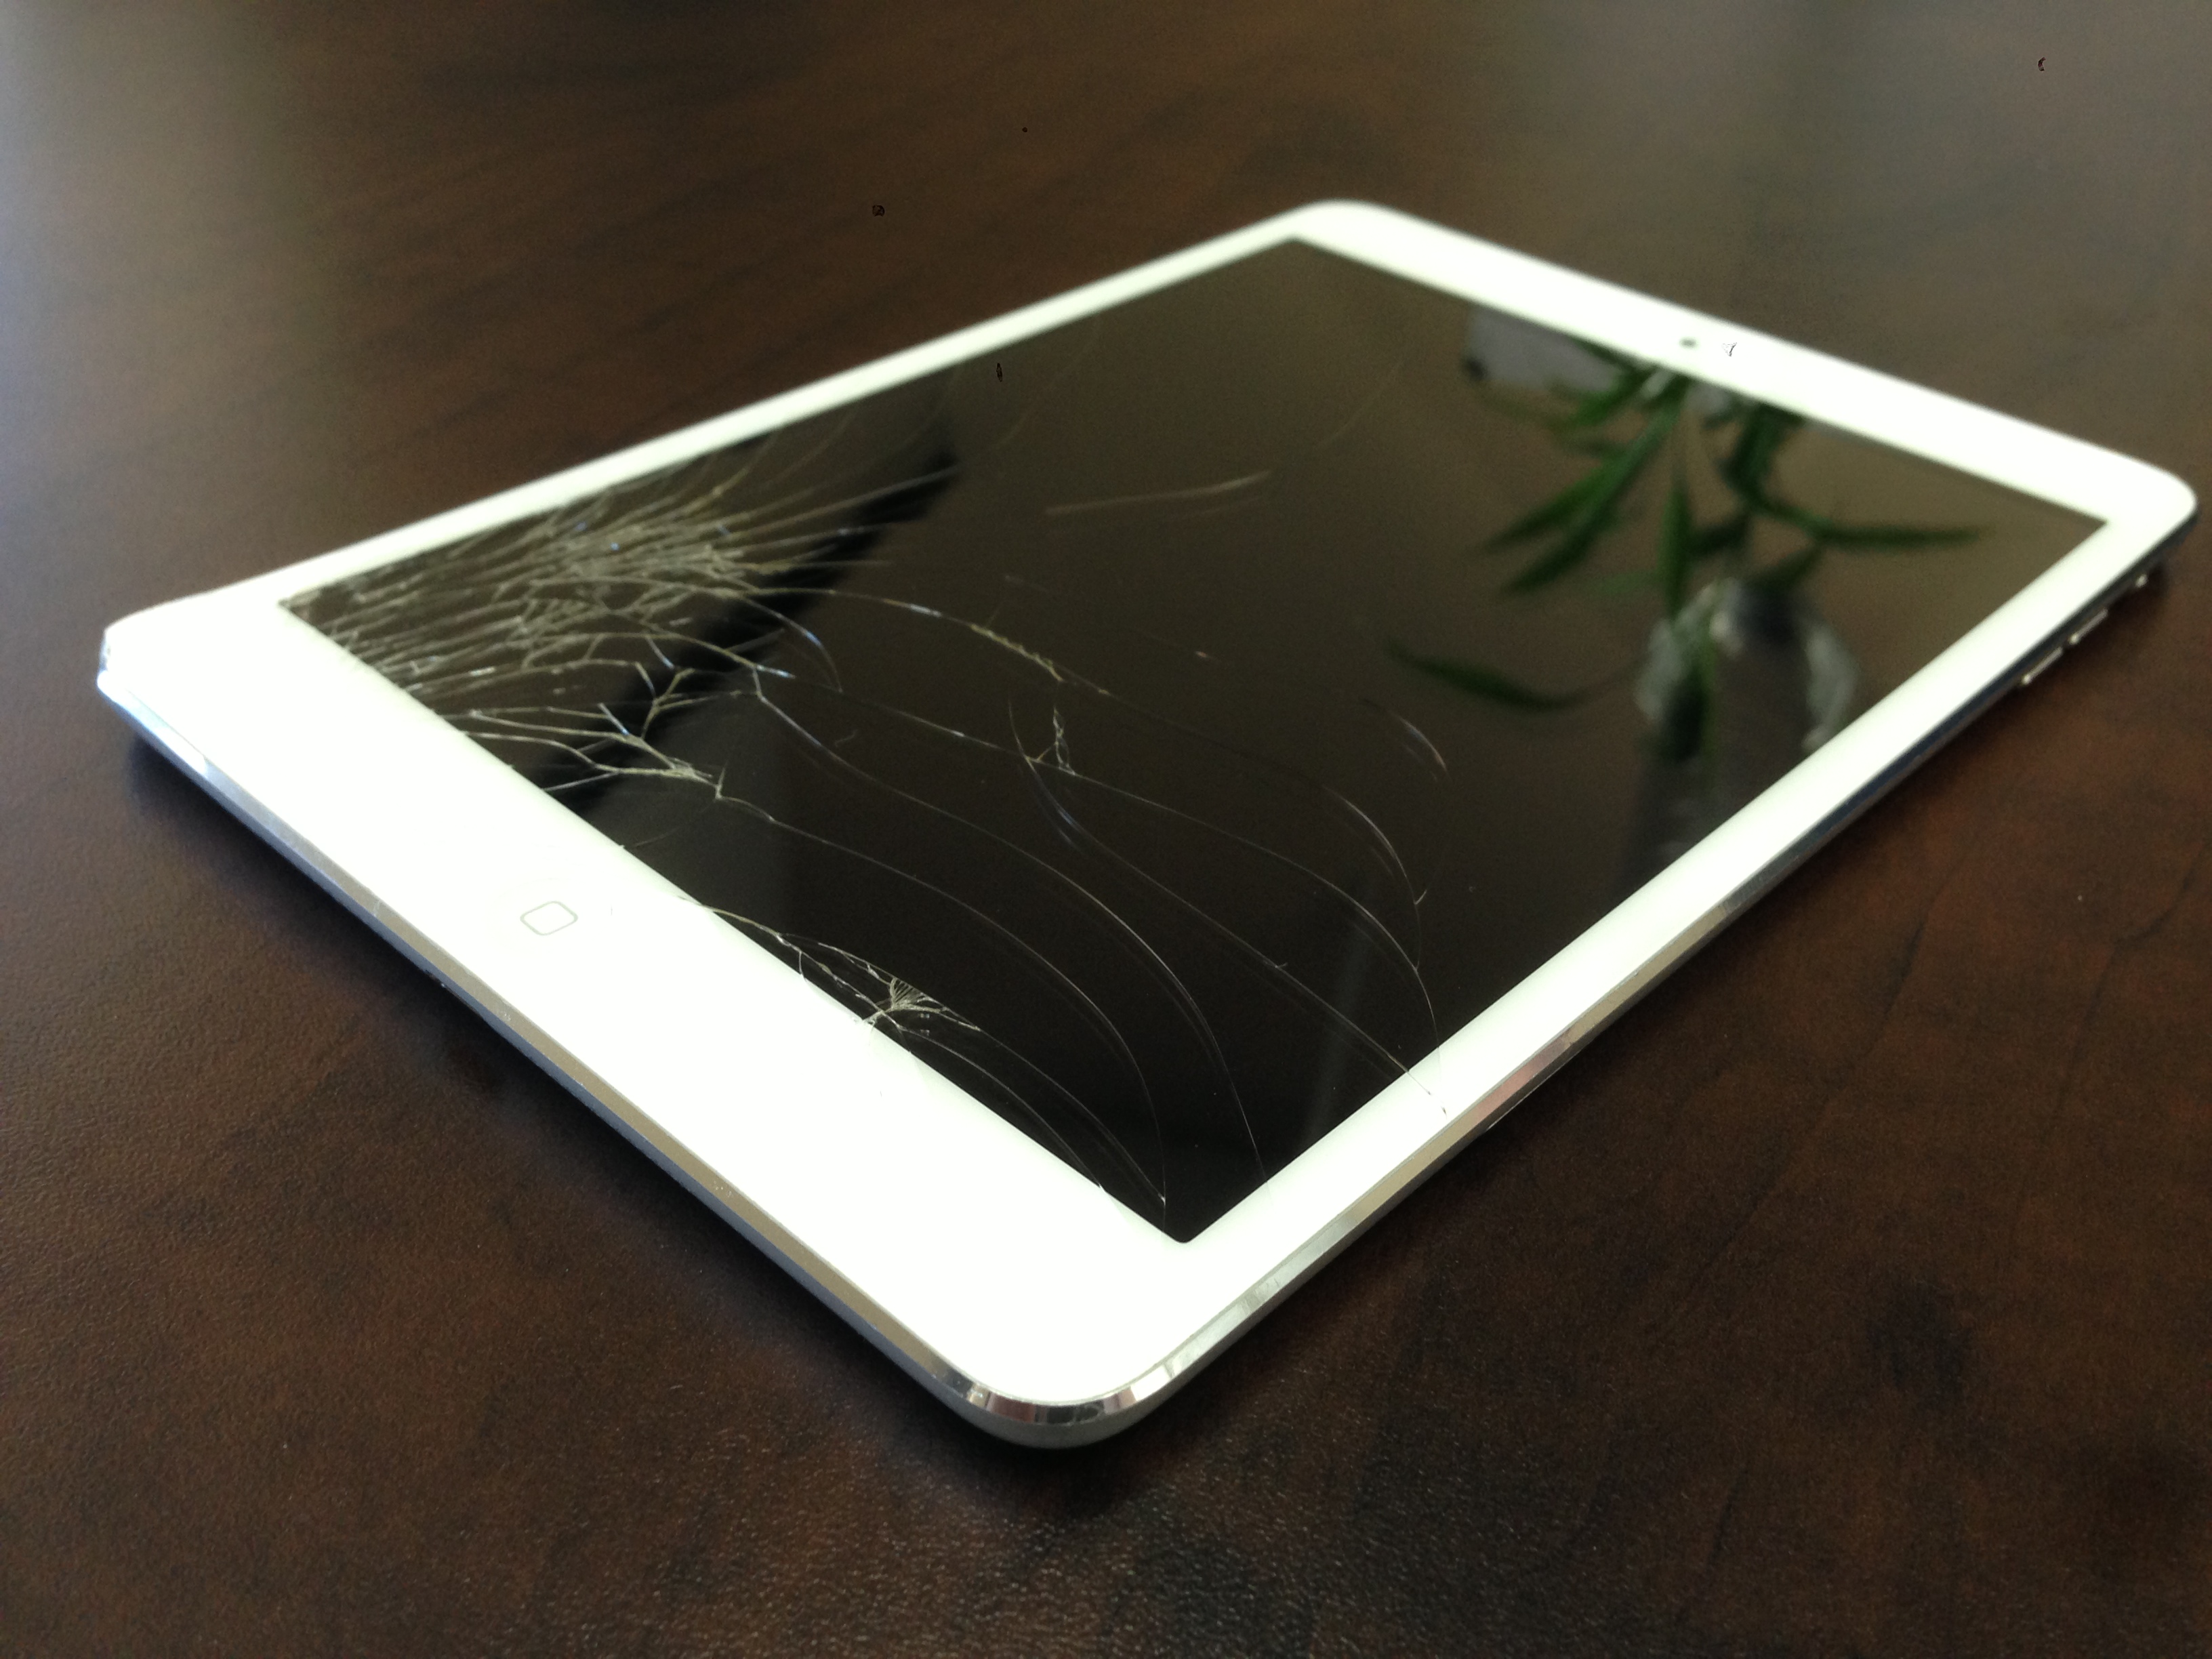 Cracked ipad screen replacement